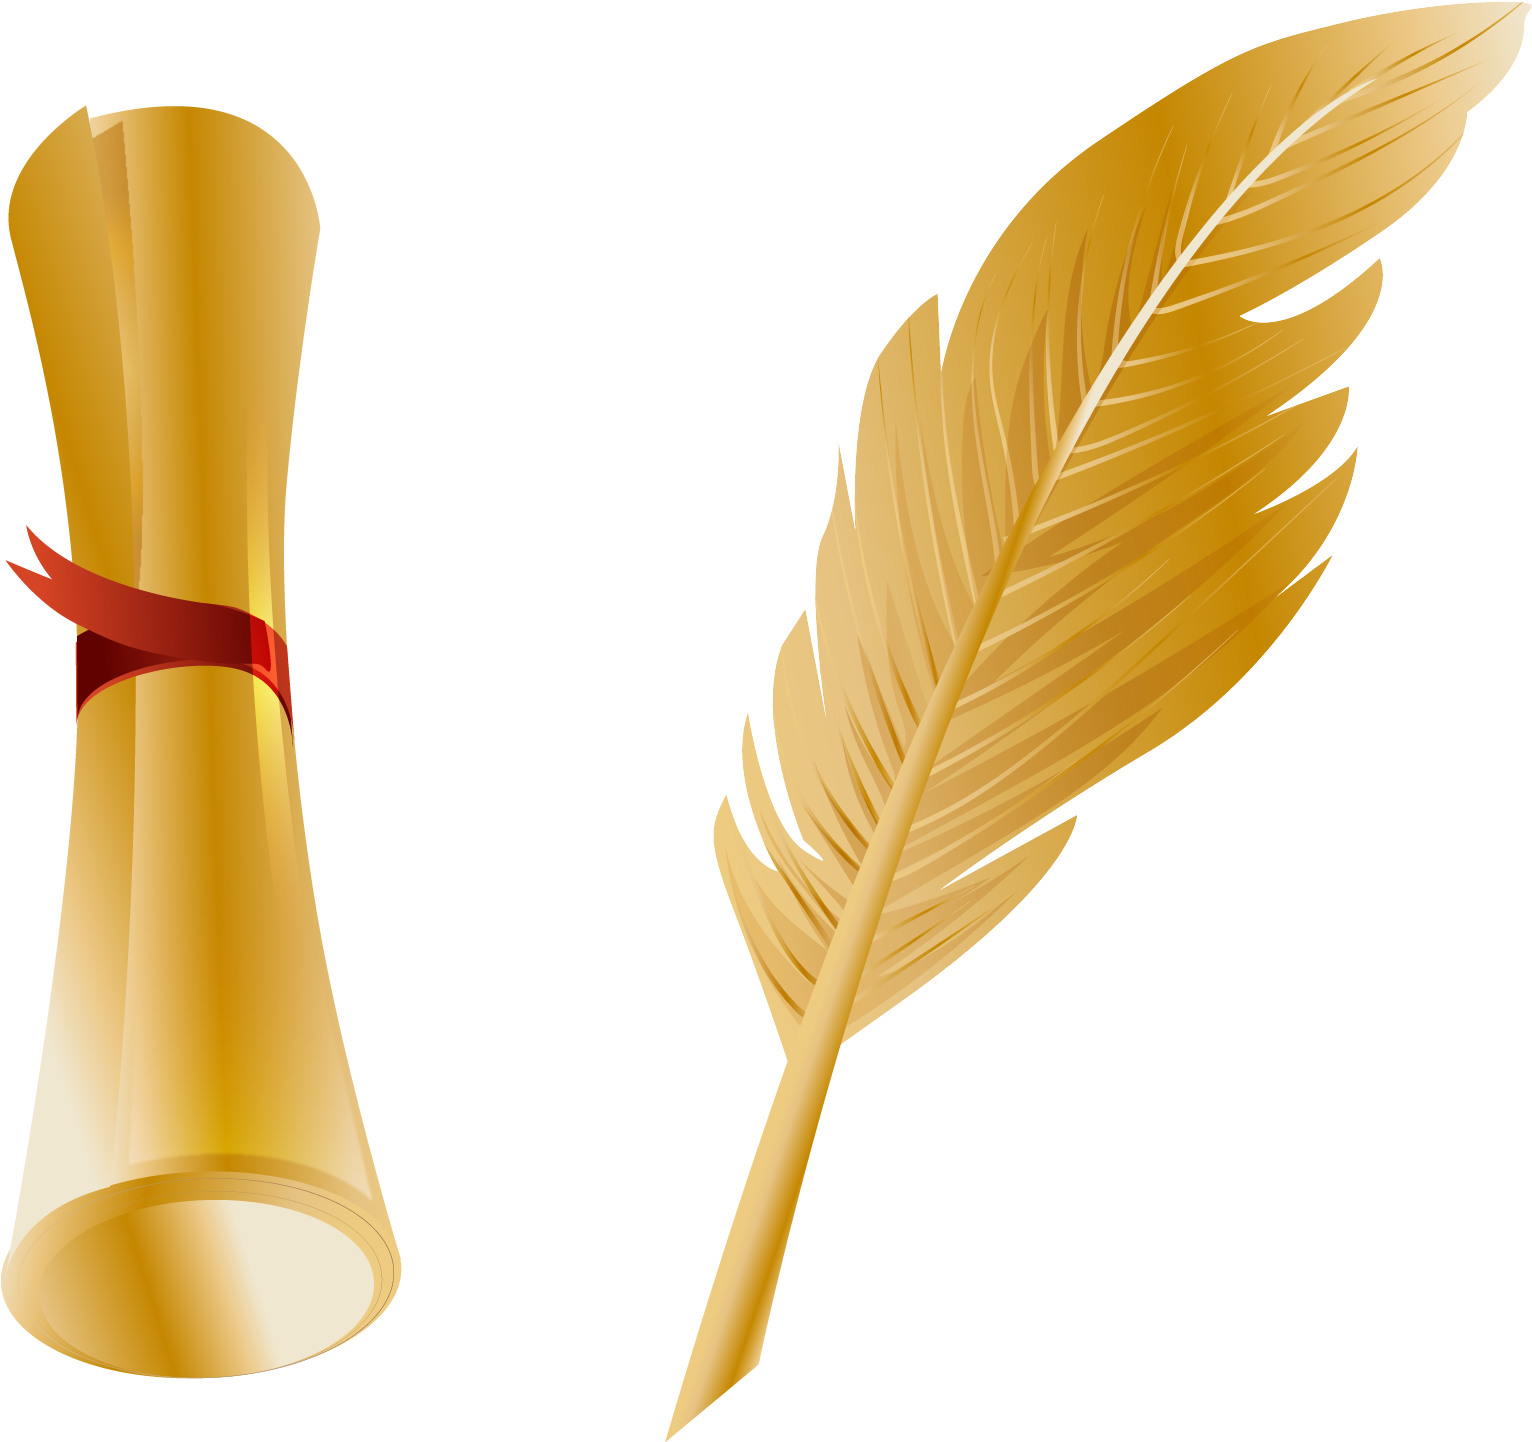 A Gold Feather And A Rolled Up Paper